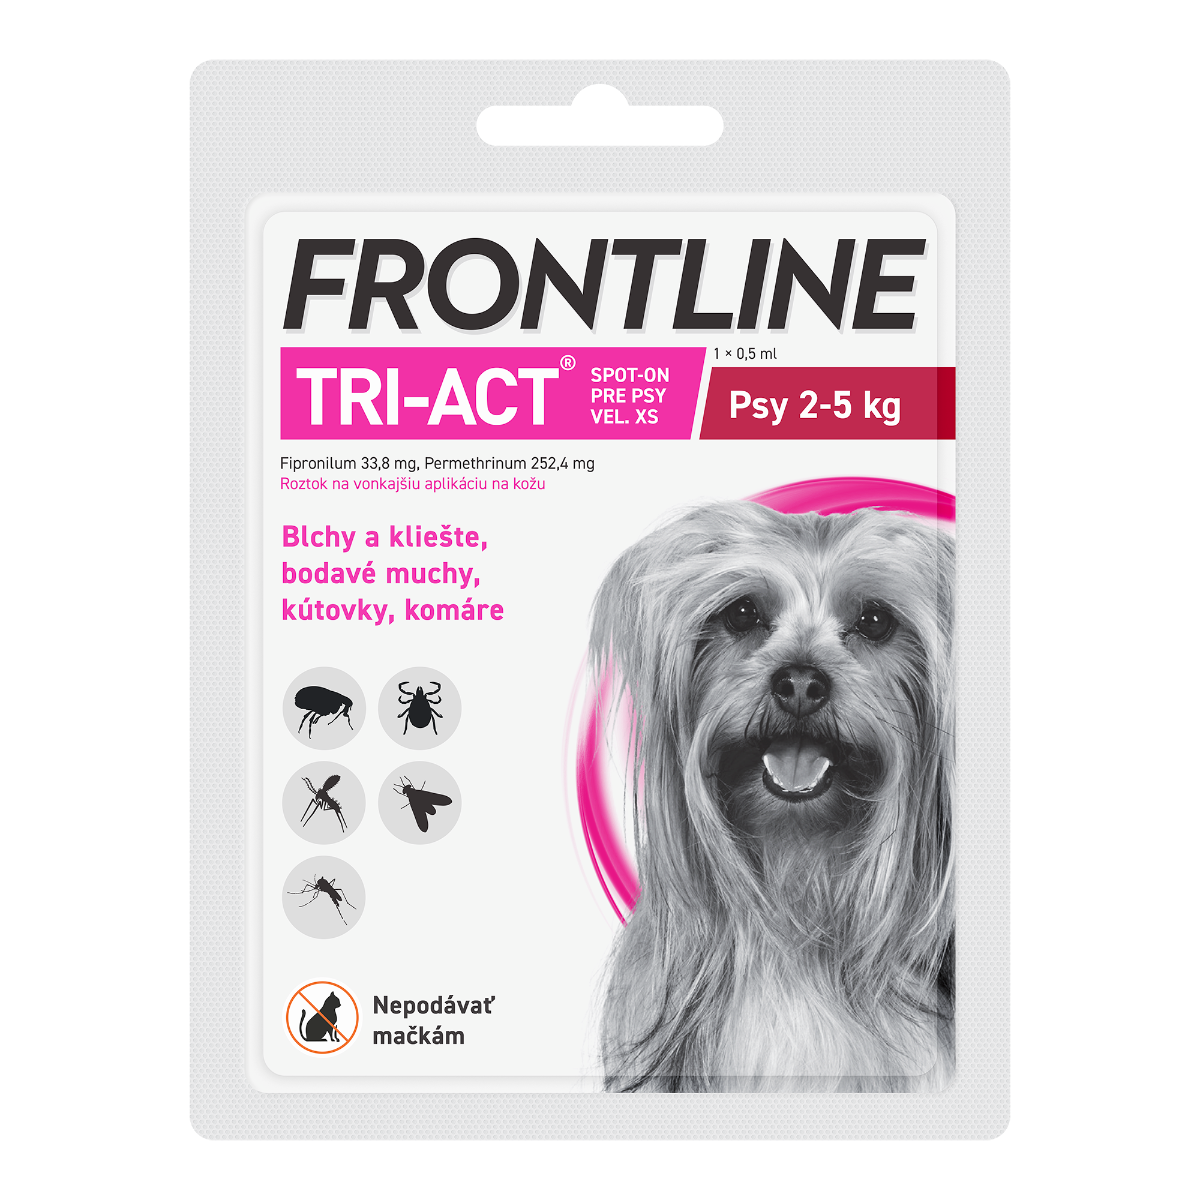 FRONTLINE TRI-ACT Spot-on r XS (2-5 kg) - 1 x 0,5 ml